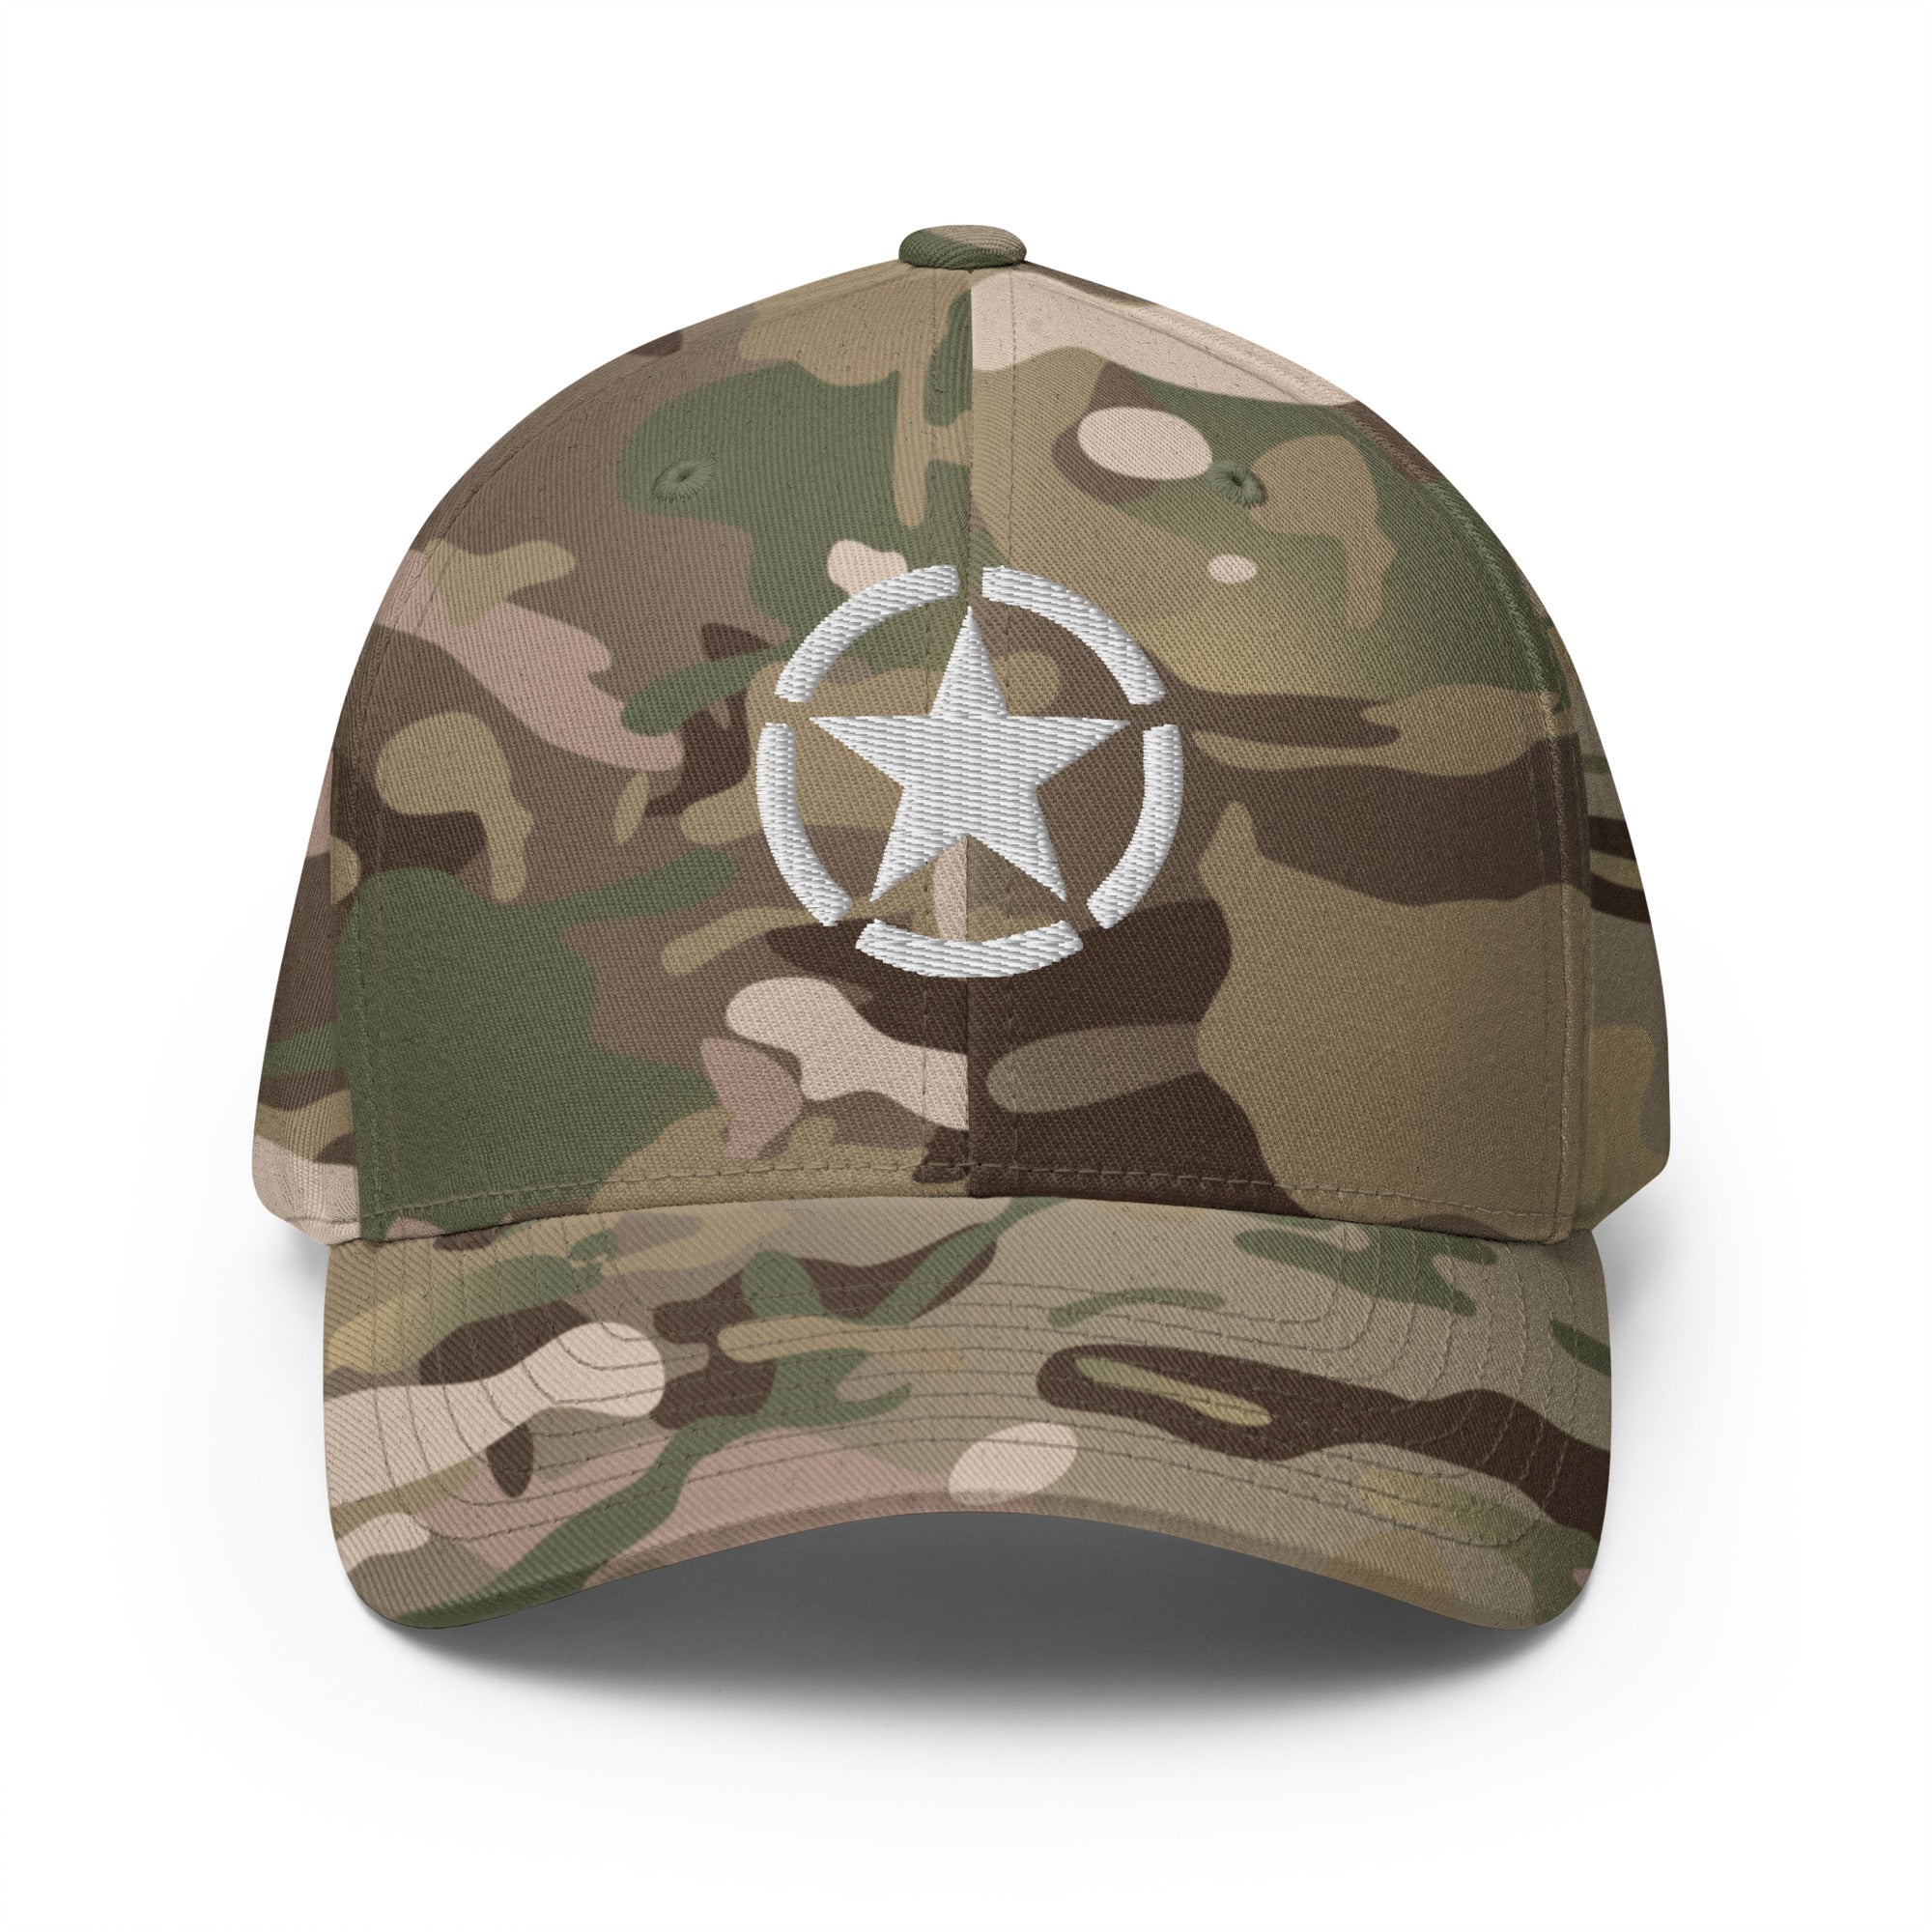 WW2 Circled Star Fitted Cap